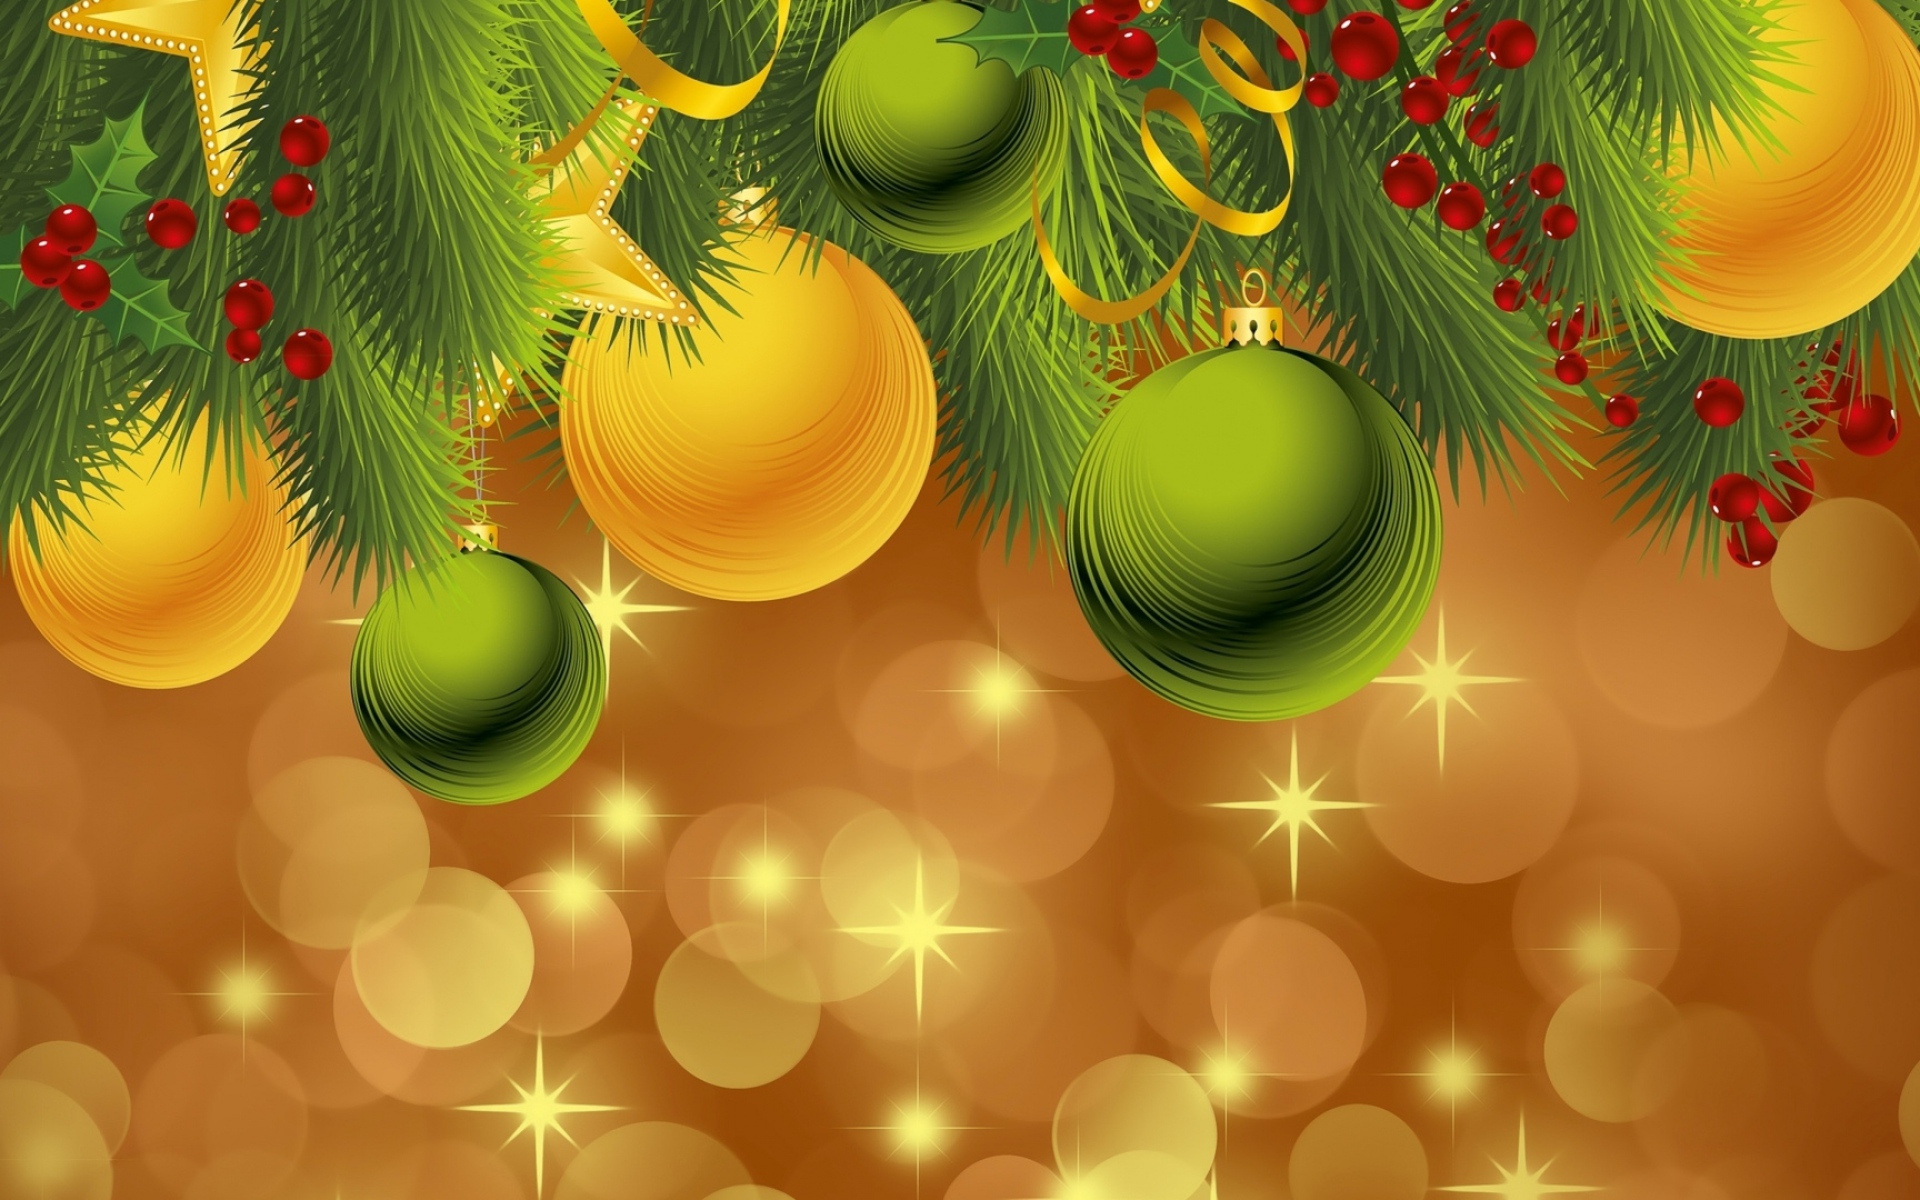 Zoom in the holidays with Christmas Zoom Background free download options